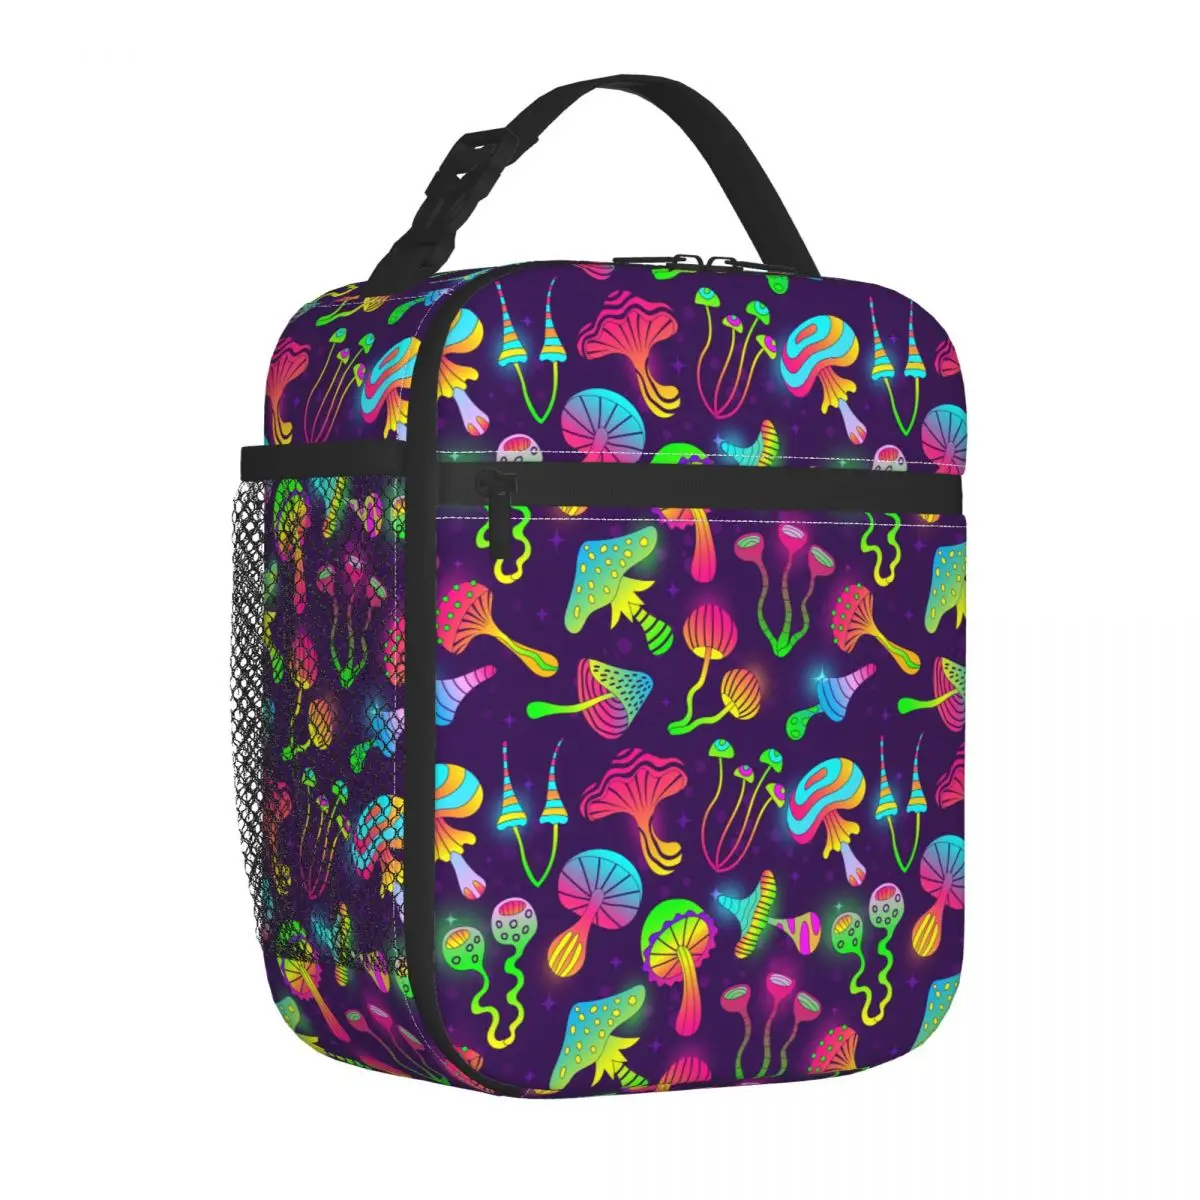 

Neon Psychodelic Mushrooms Thermal Insulated Lunch Bag School Aesthetic Mushroom Portable Bento Box Thermal Cooler Food Box